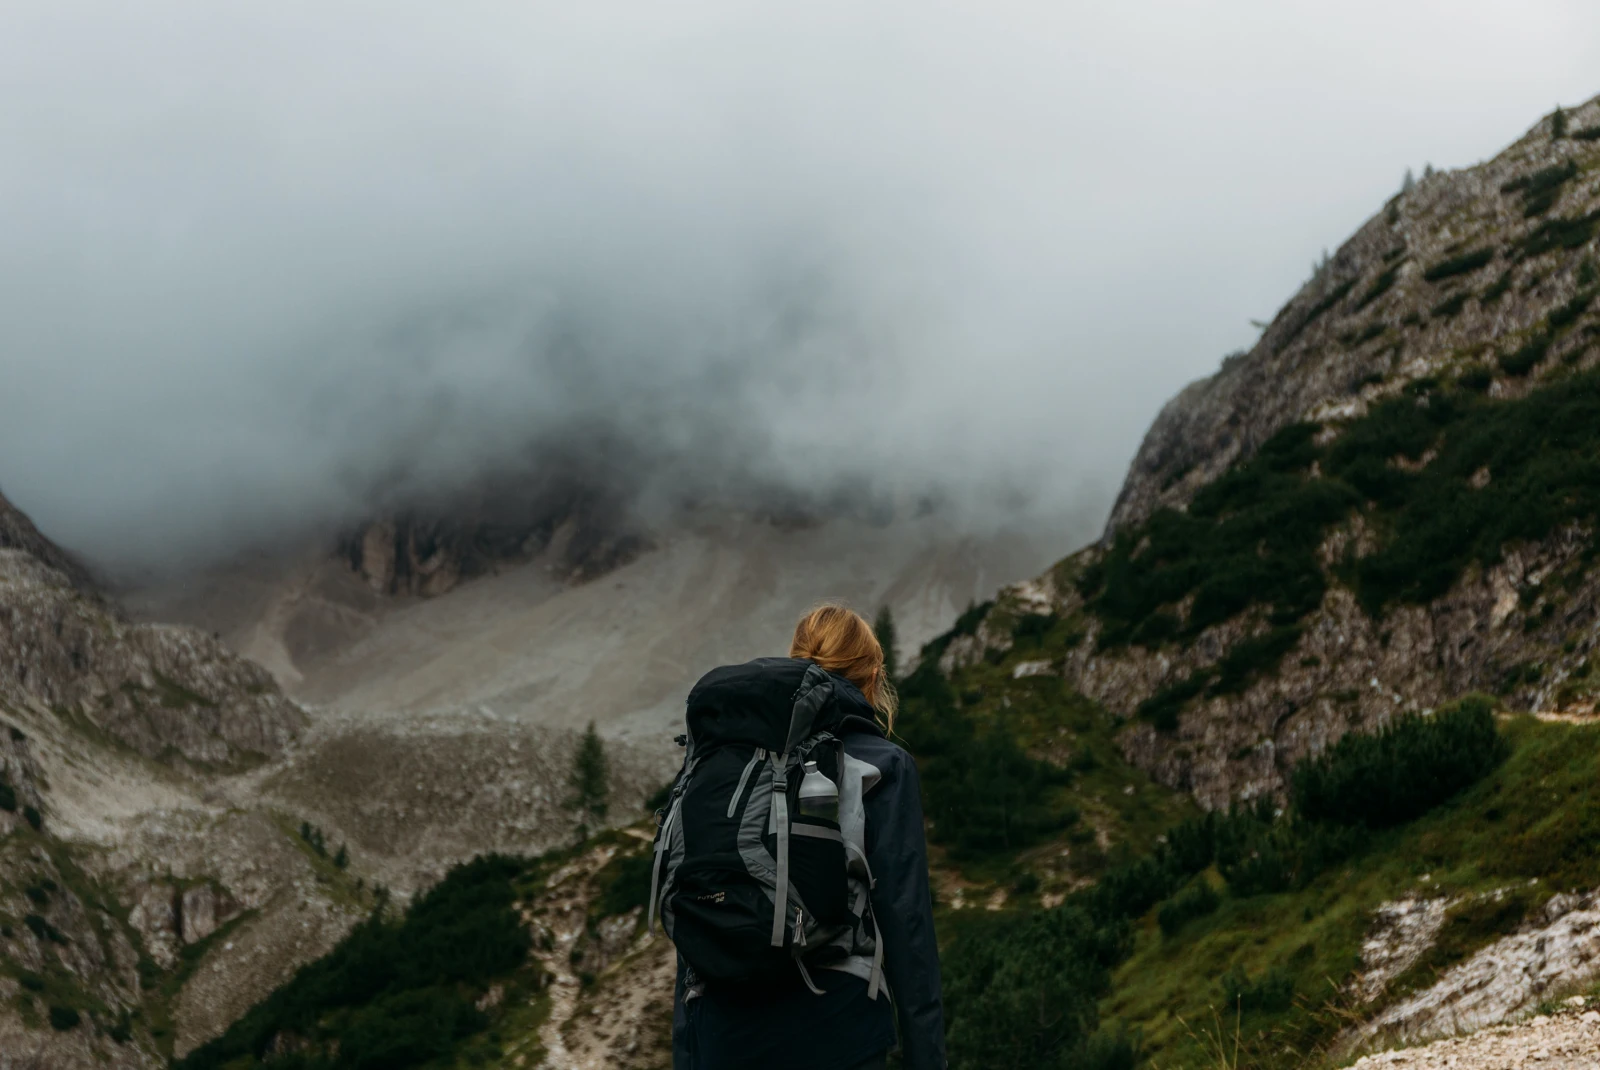 Person wearing backpack and orange hat faces mountains in the background covered in fog in Italy